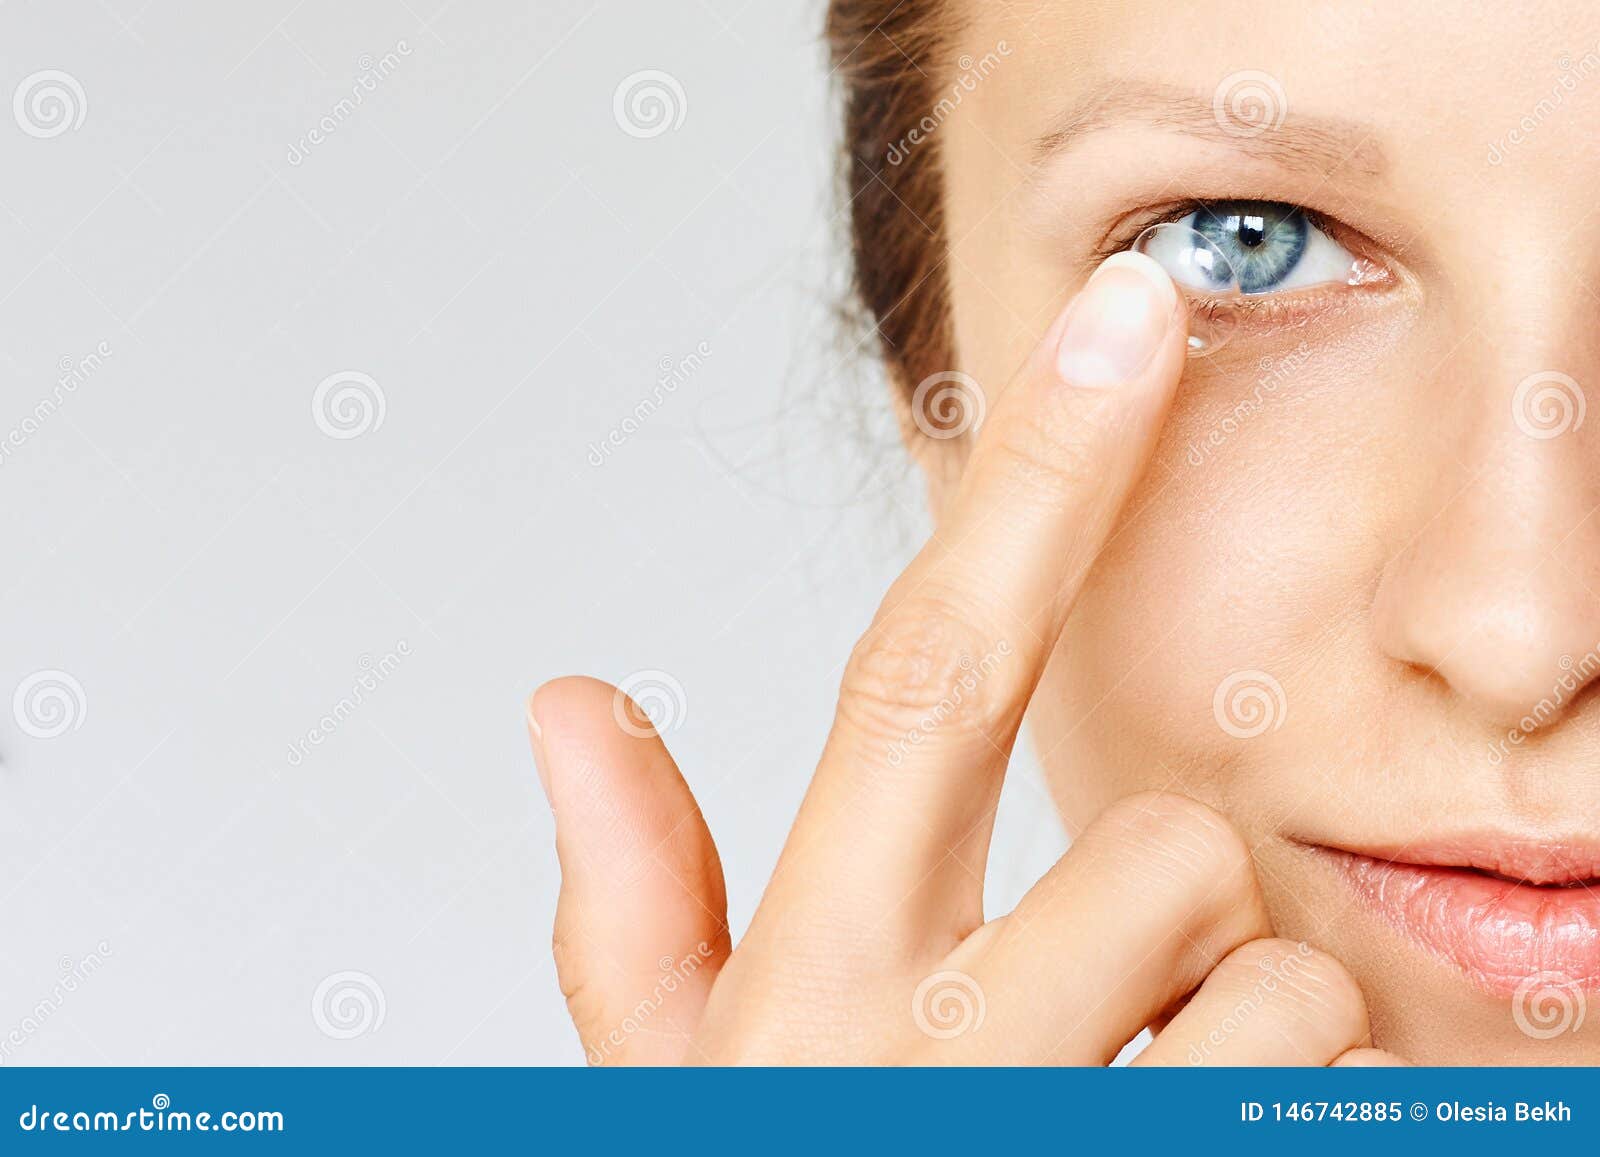 young woman puts contact lens in her eye. eyewear, eyesight and vision, eye care and health, ophthalmology and optometry concept